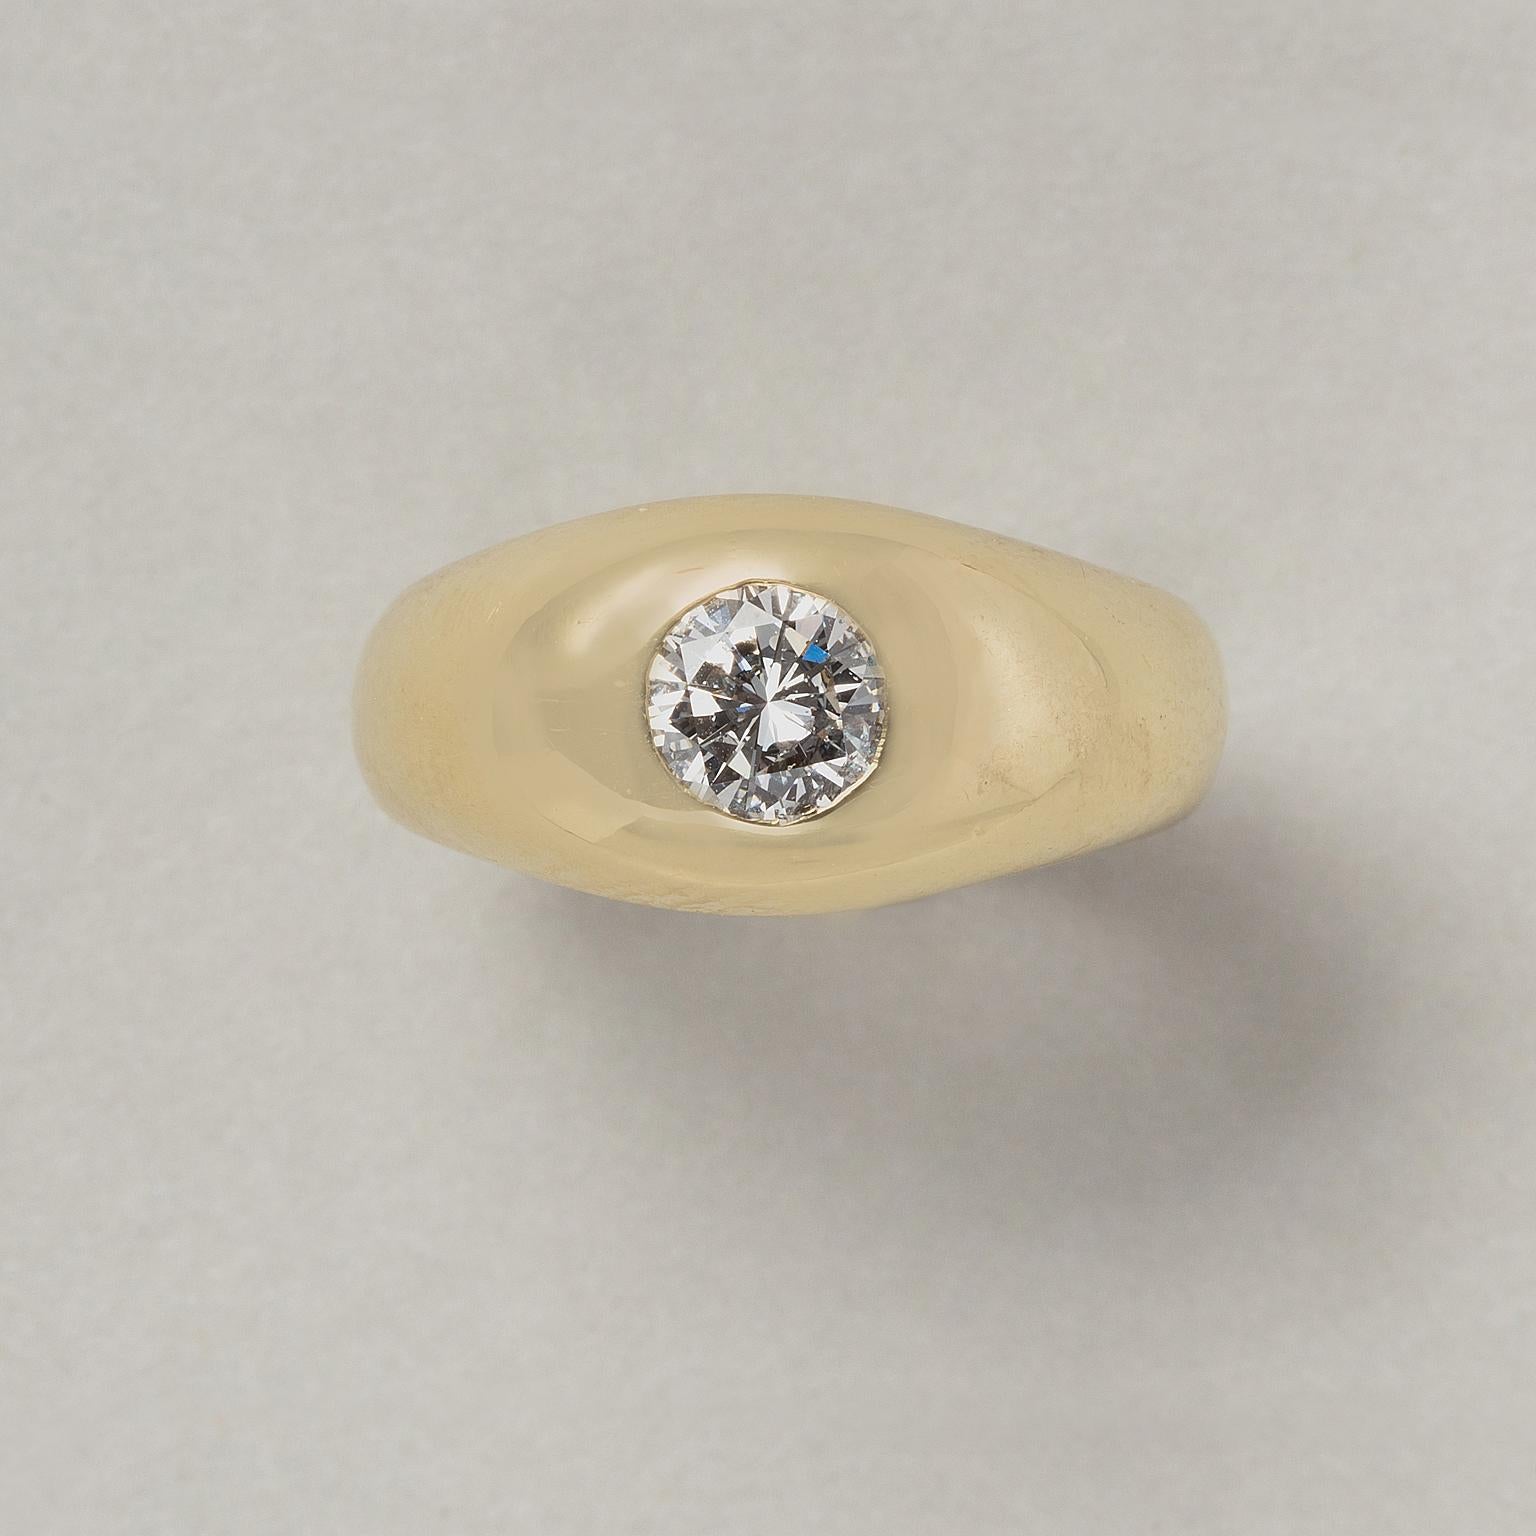 A 14 carat yellow gold ring flush set with a round brillant cut diamond (circa 1.11 ct. D, PII).

ring size: 18.5 mm / 8.5 US.
weight: 11.8 grams